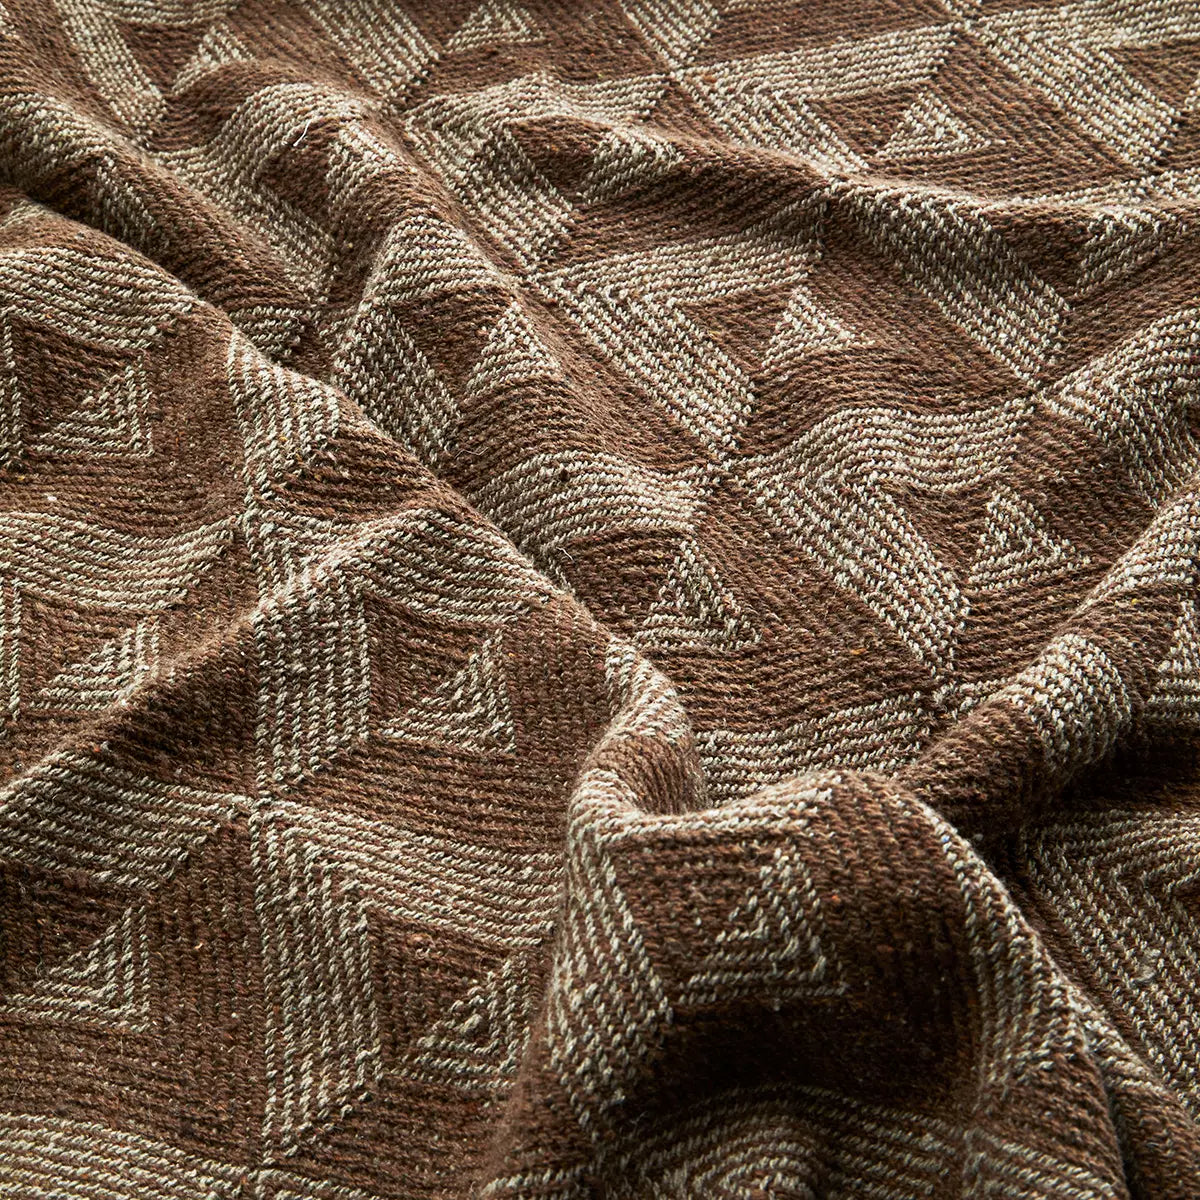 Sepia & Rich Cream Geometric Recycled Cotton Woven Throw